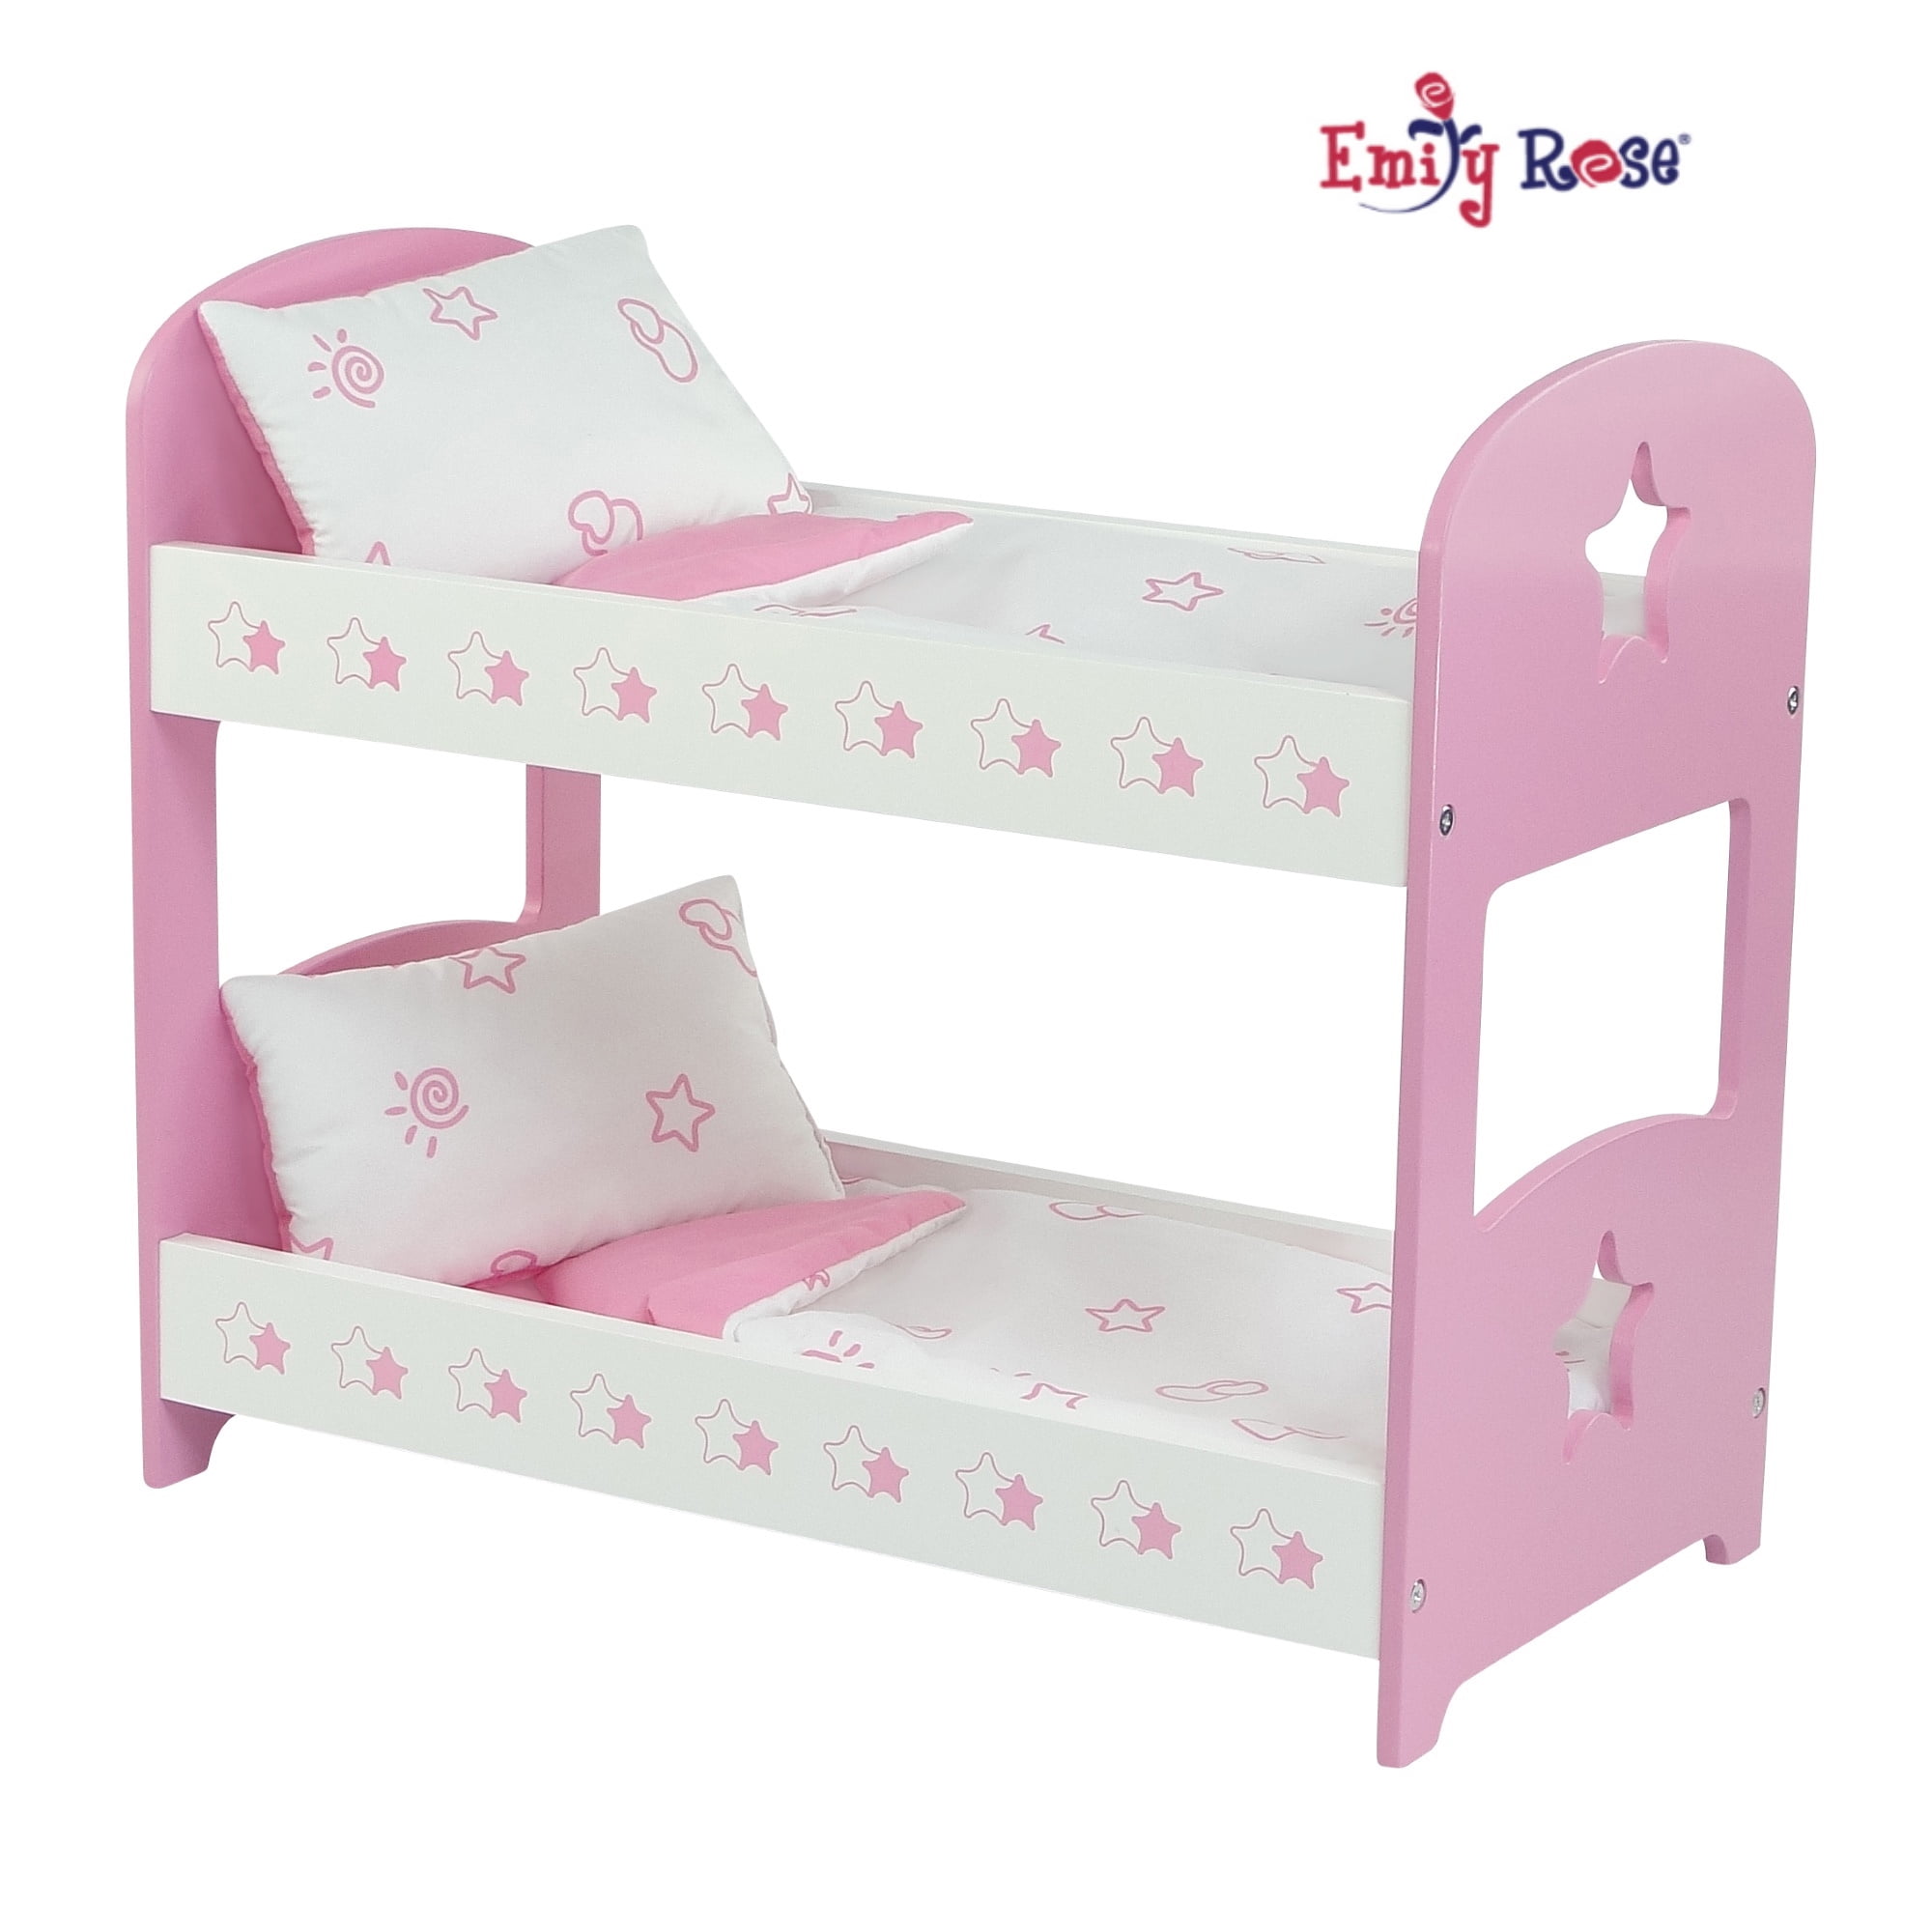 Emily Rose 18 Inch Doll Furniture Fits 18" American Girl Dolls Floral Doll and